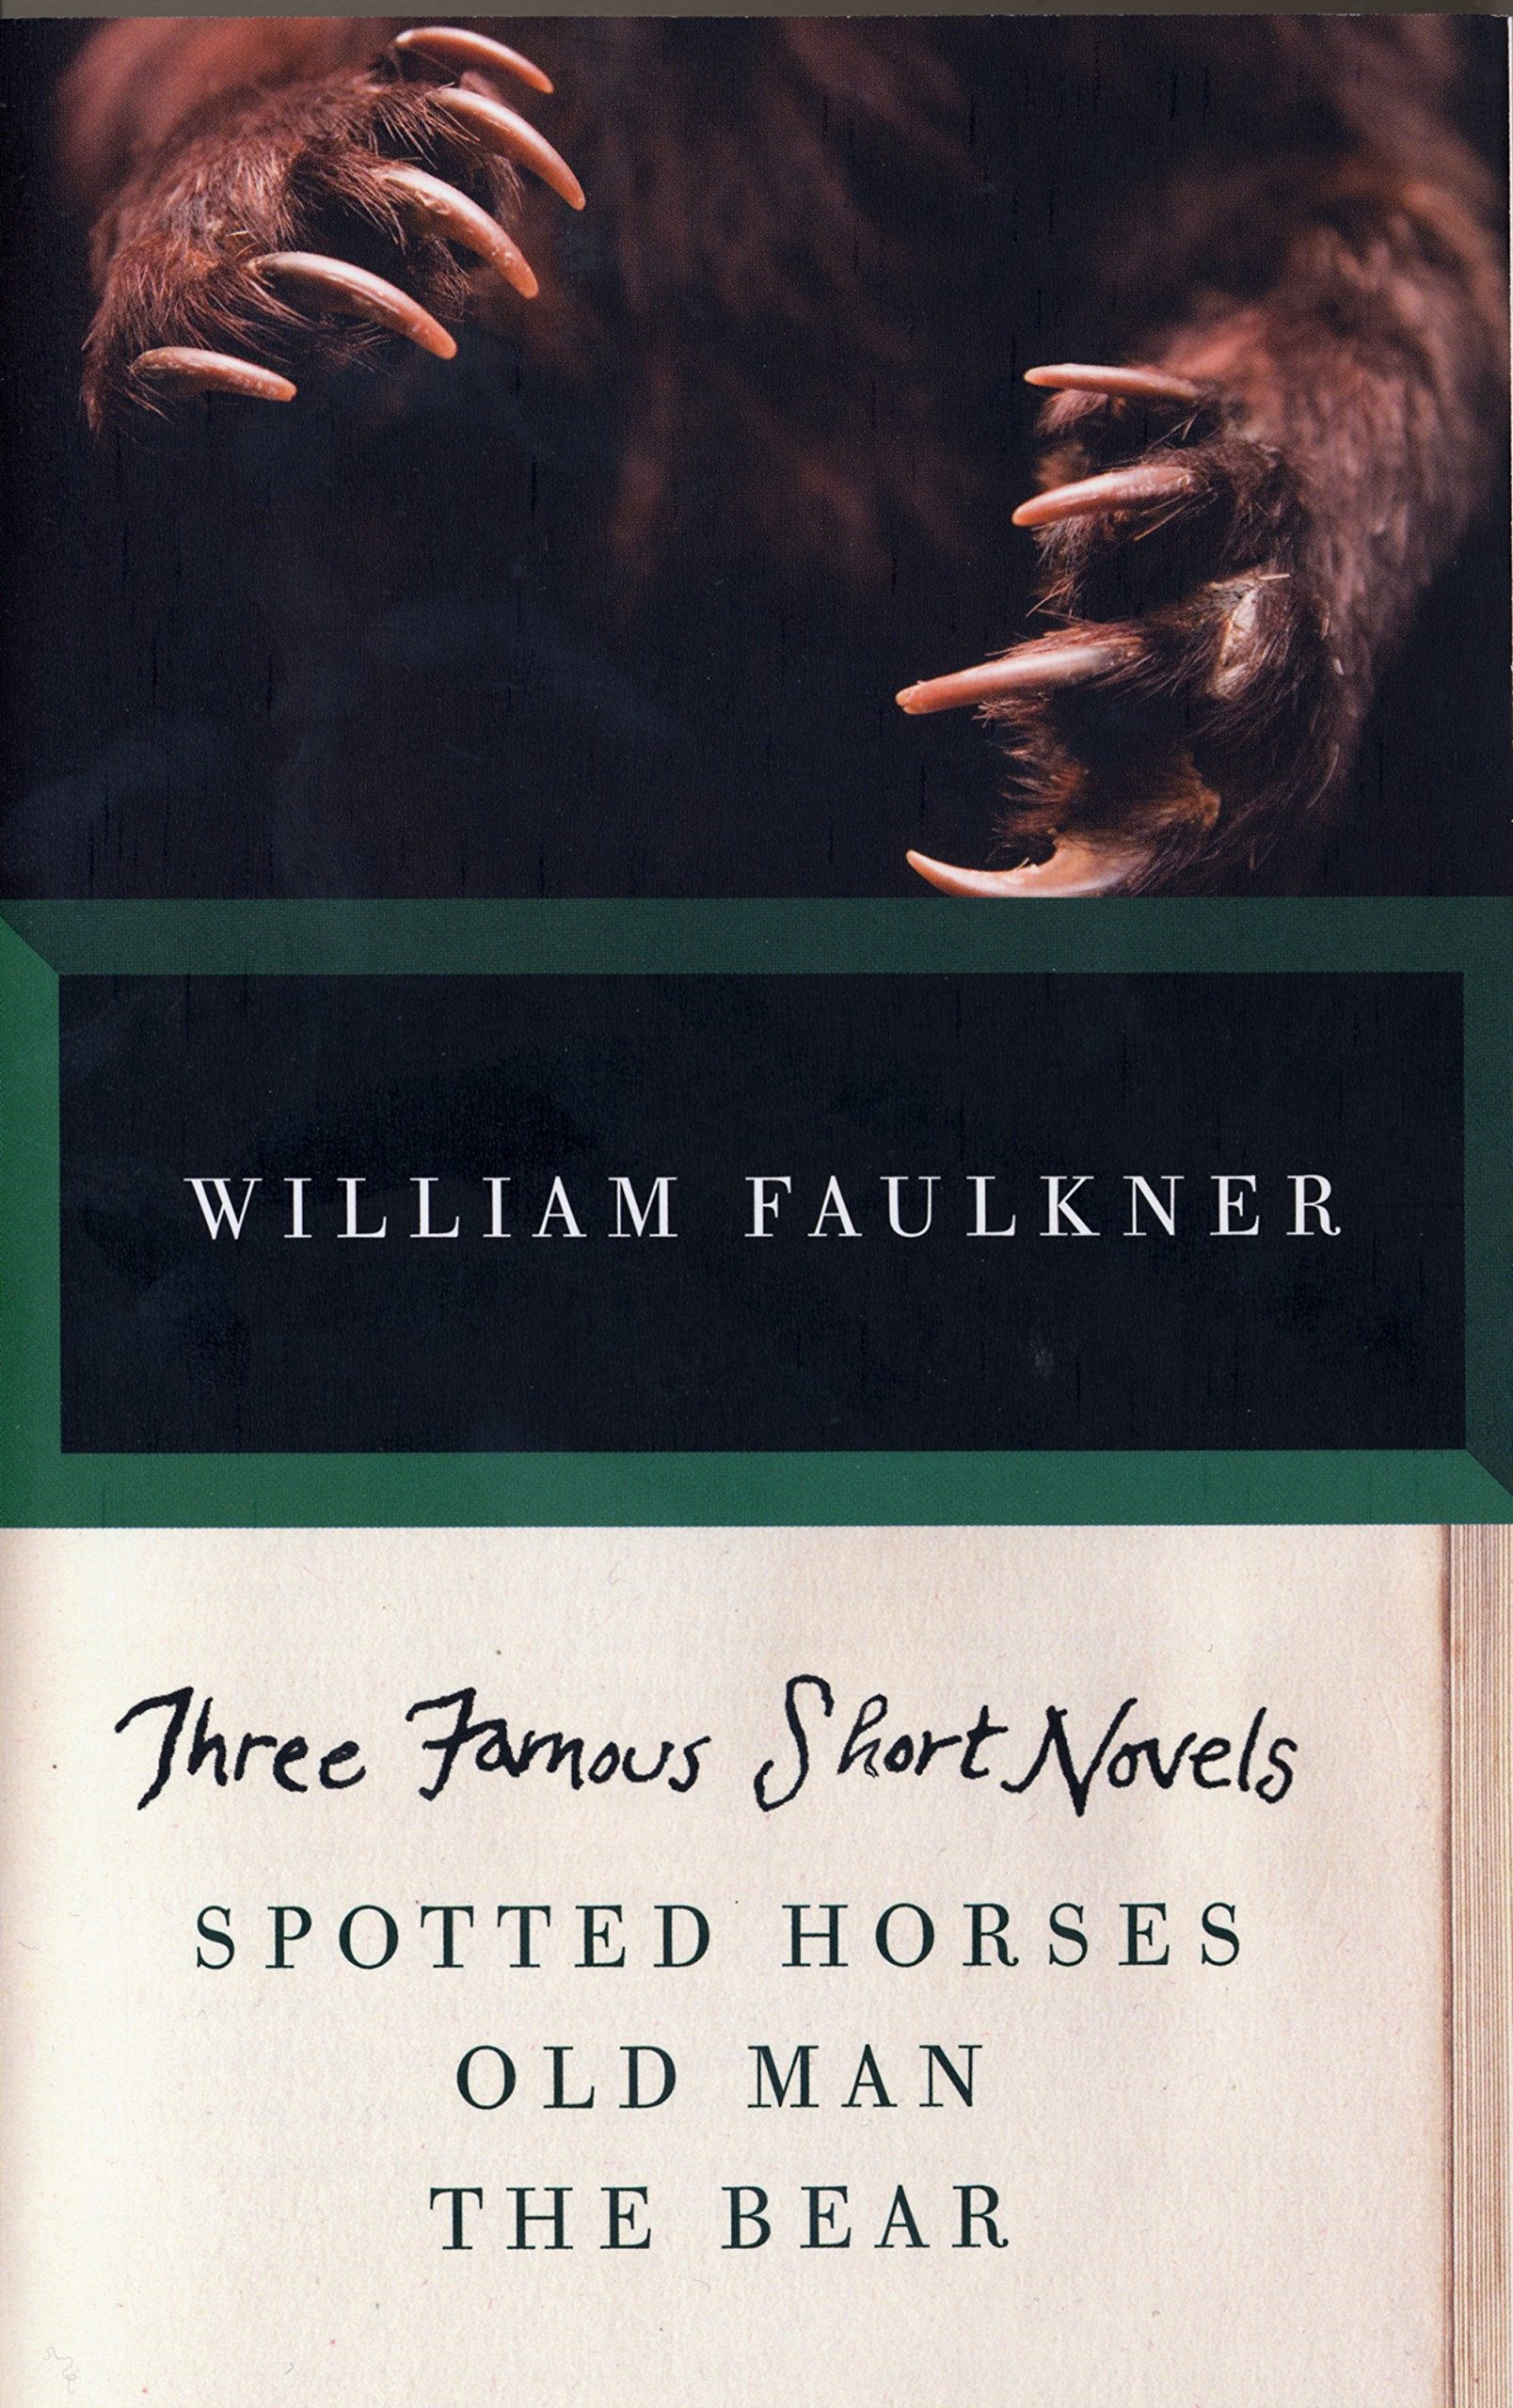 Three Famous Short Novels: Spotted Horses Old Man the Bear